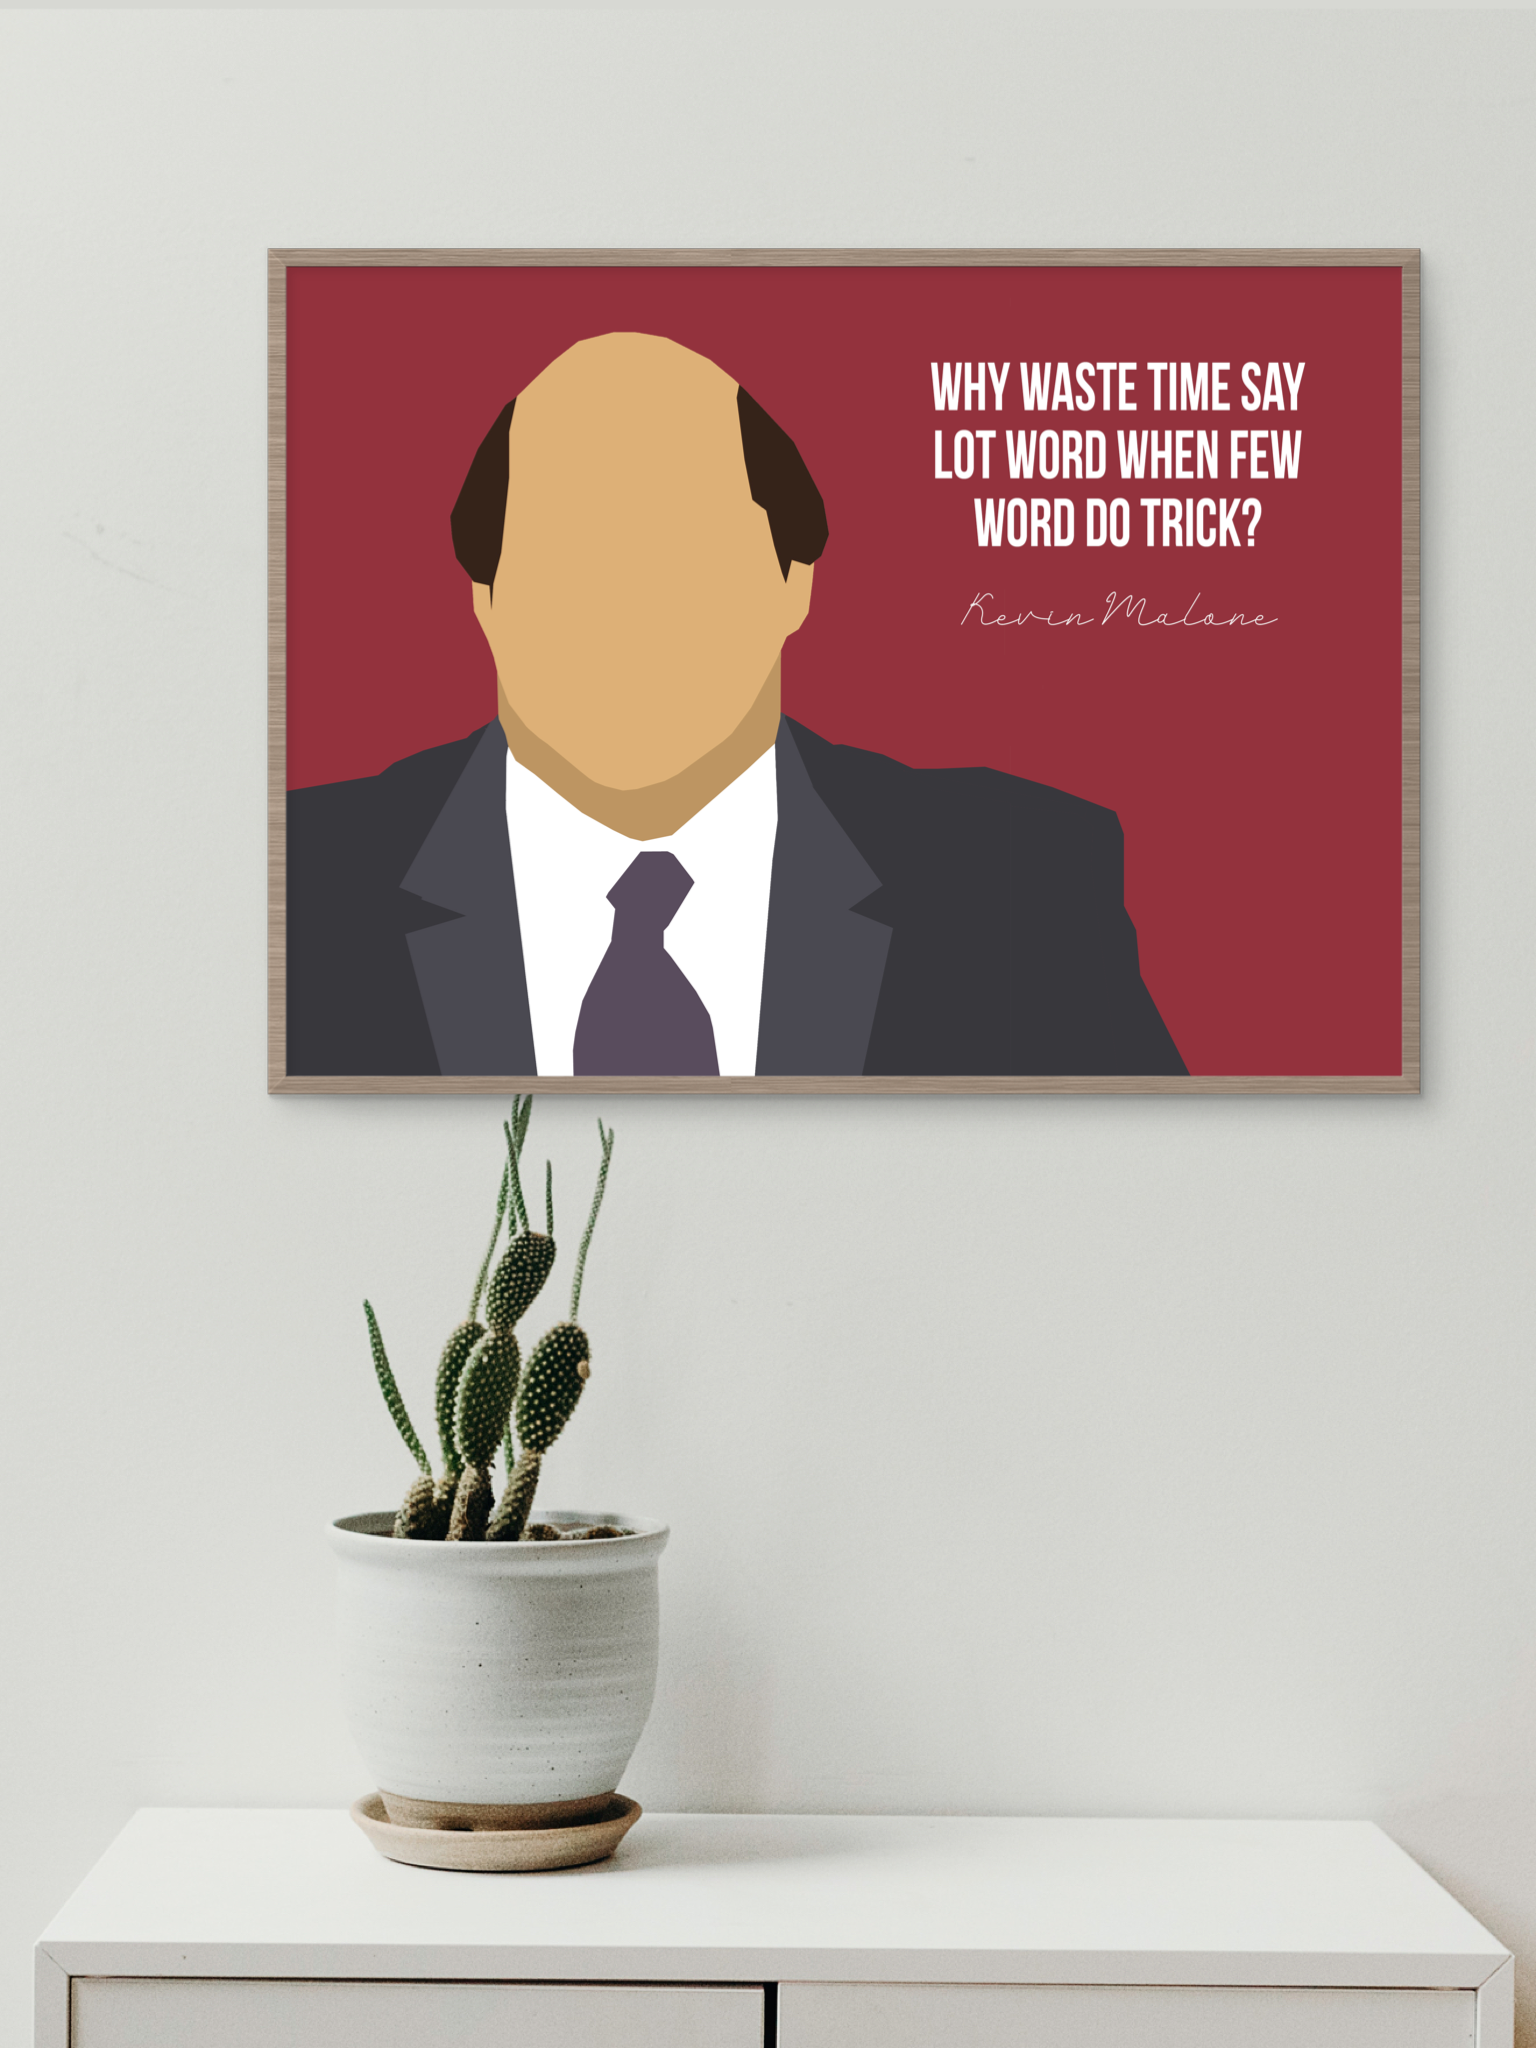 kevin malone minimal print with quote "why waste time say lot word when few word do trick?"